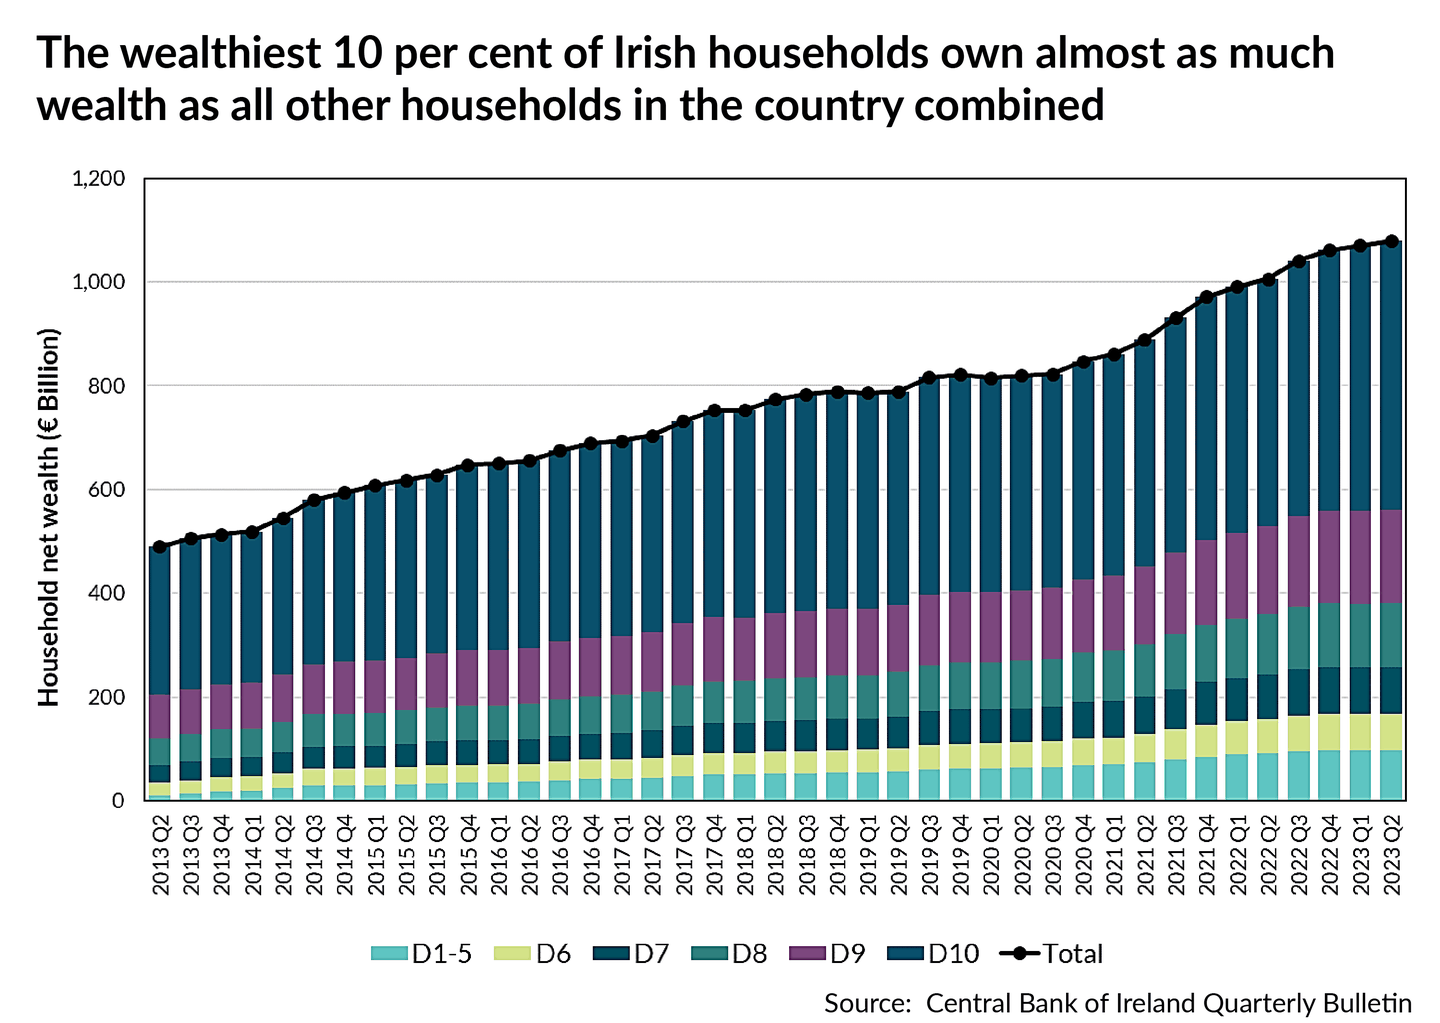 The wealthiest 10 per cent of Irish households own almost as much wealth as all other households in the country combined